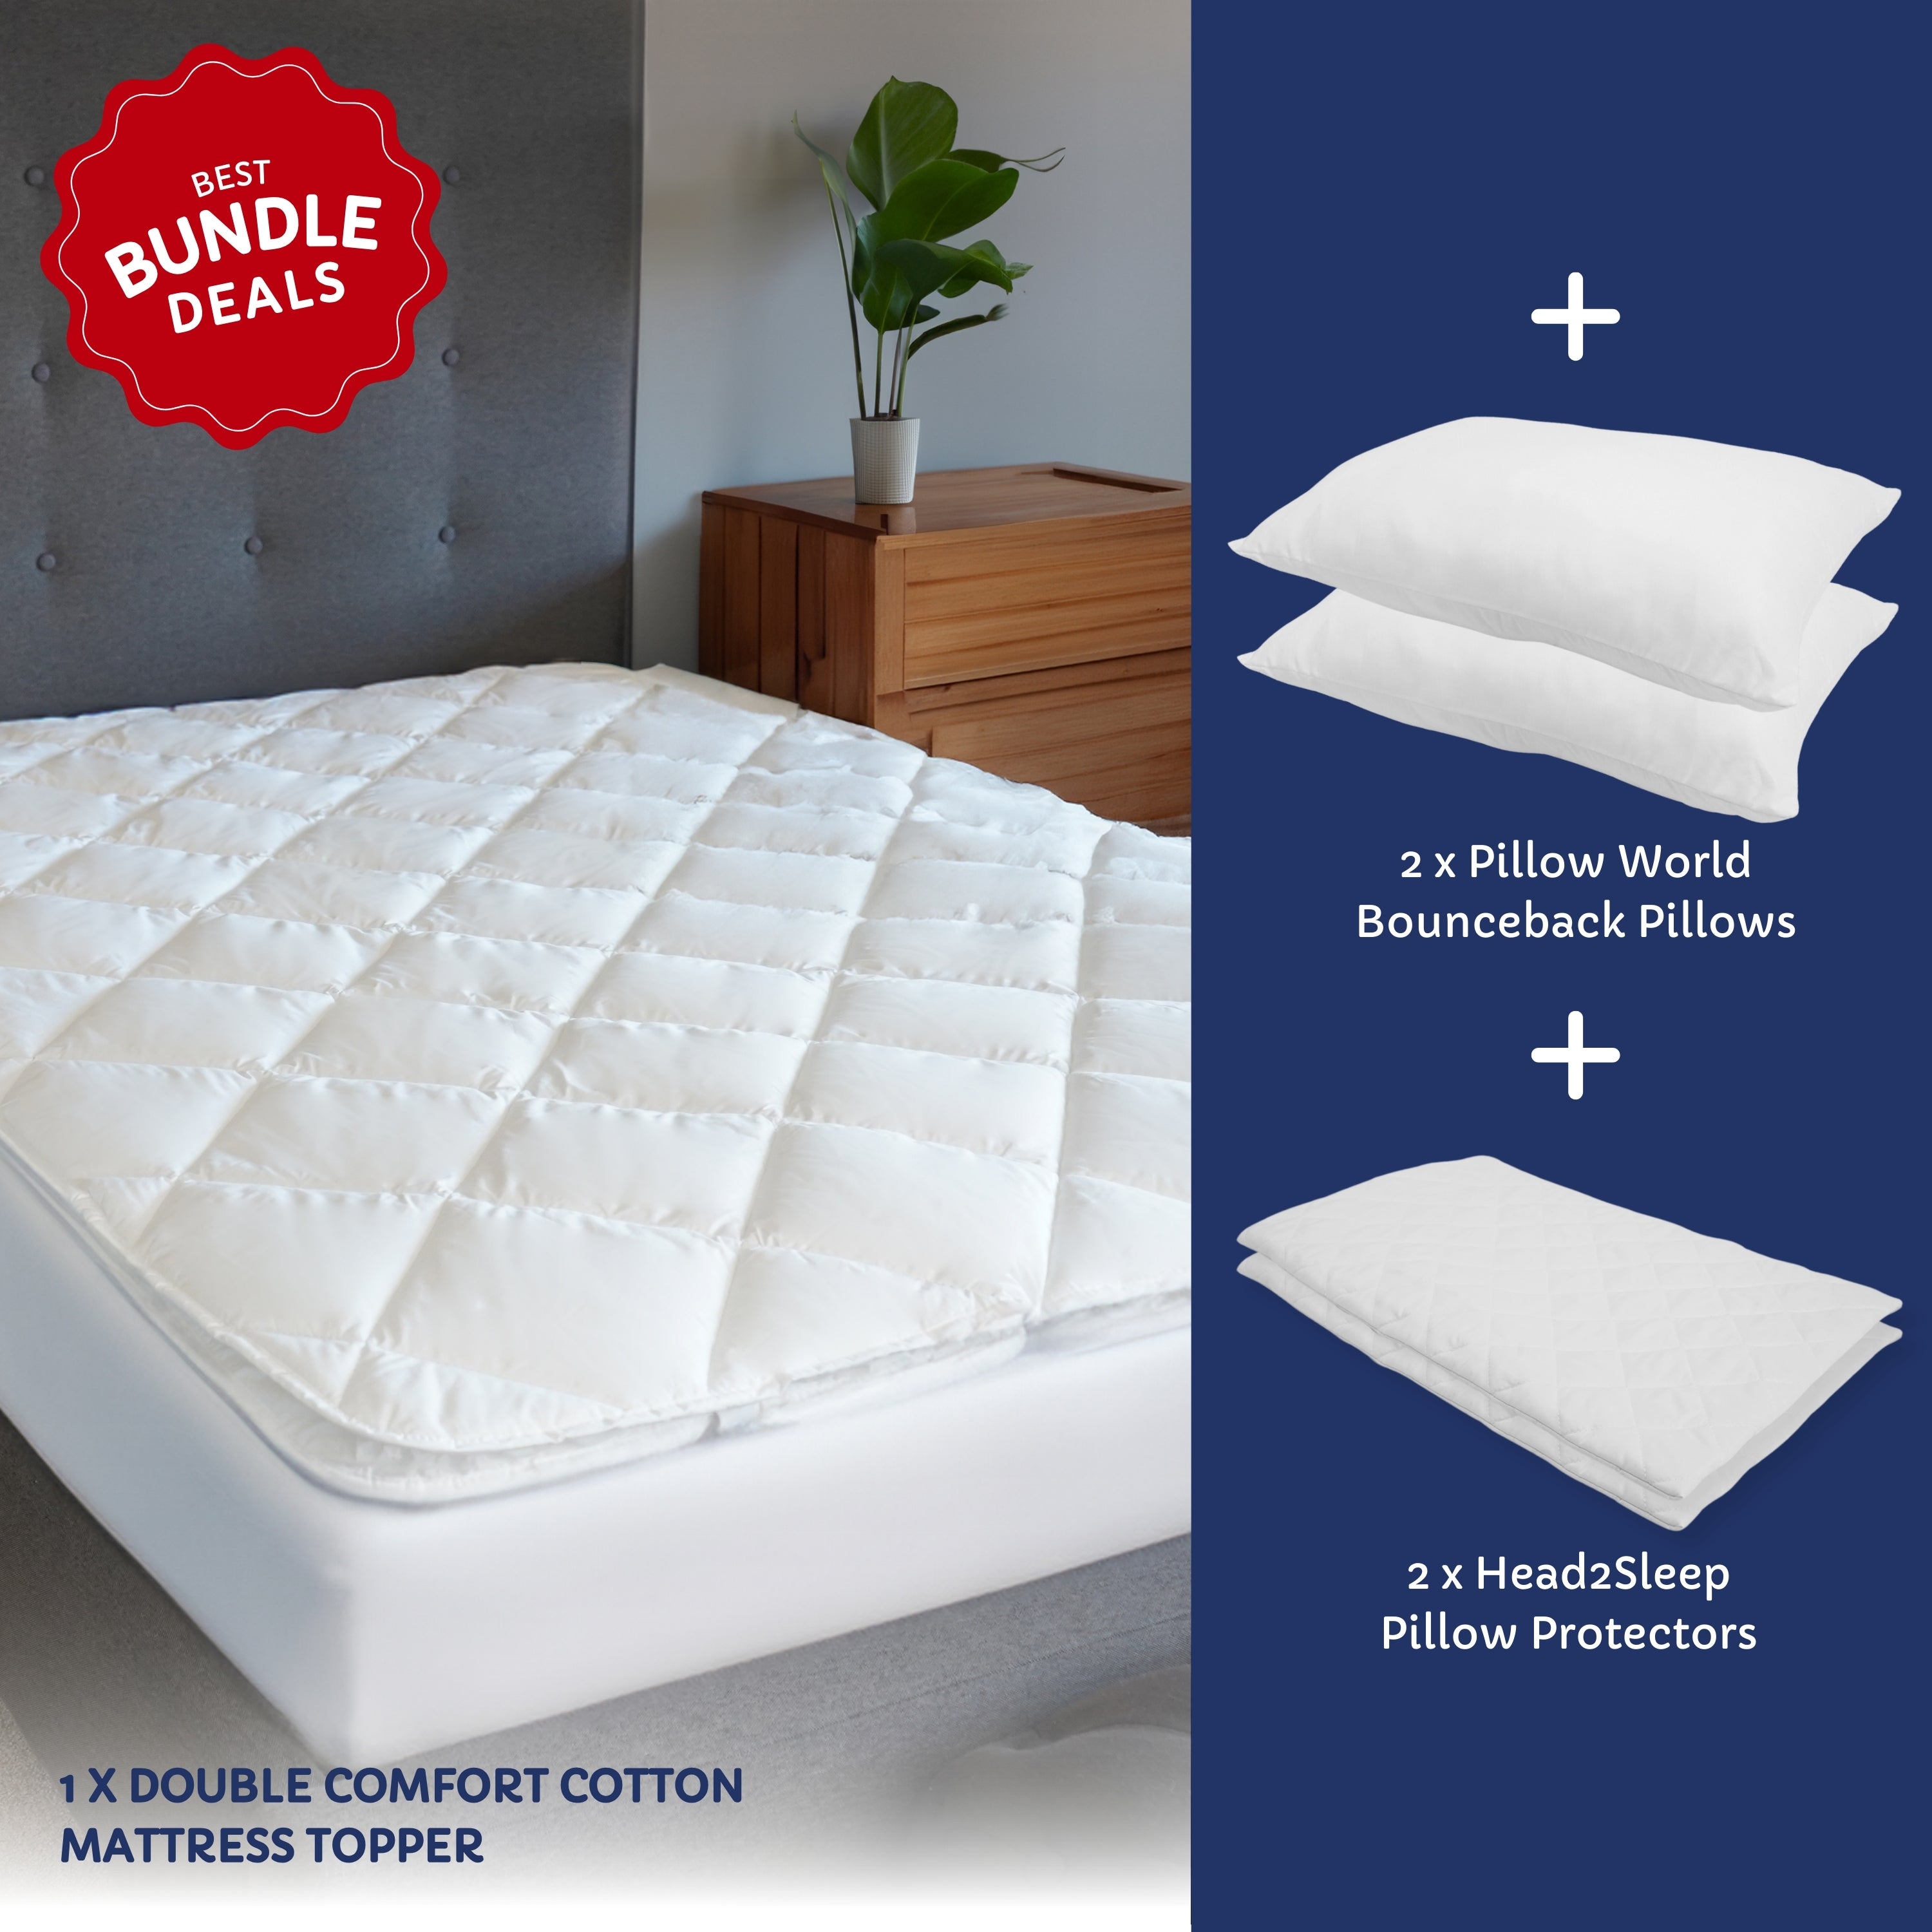 Hotel Comfort Bundle - Mattress Topper with Pillows and Pillow Protectors